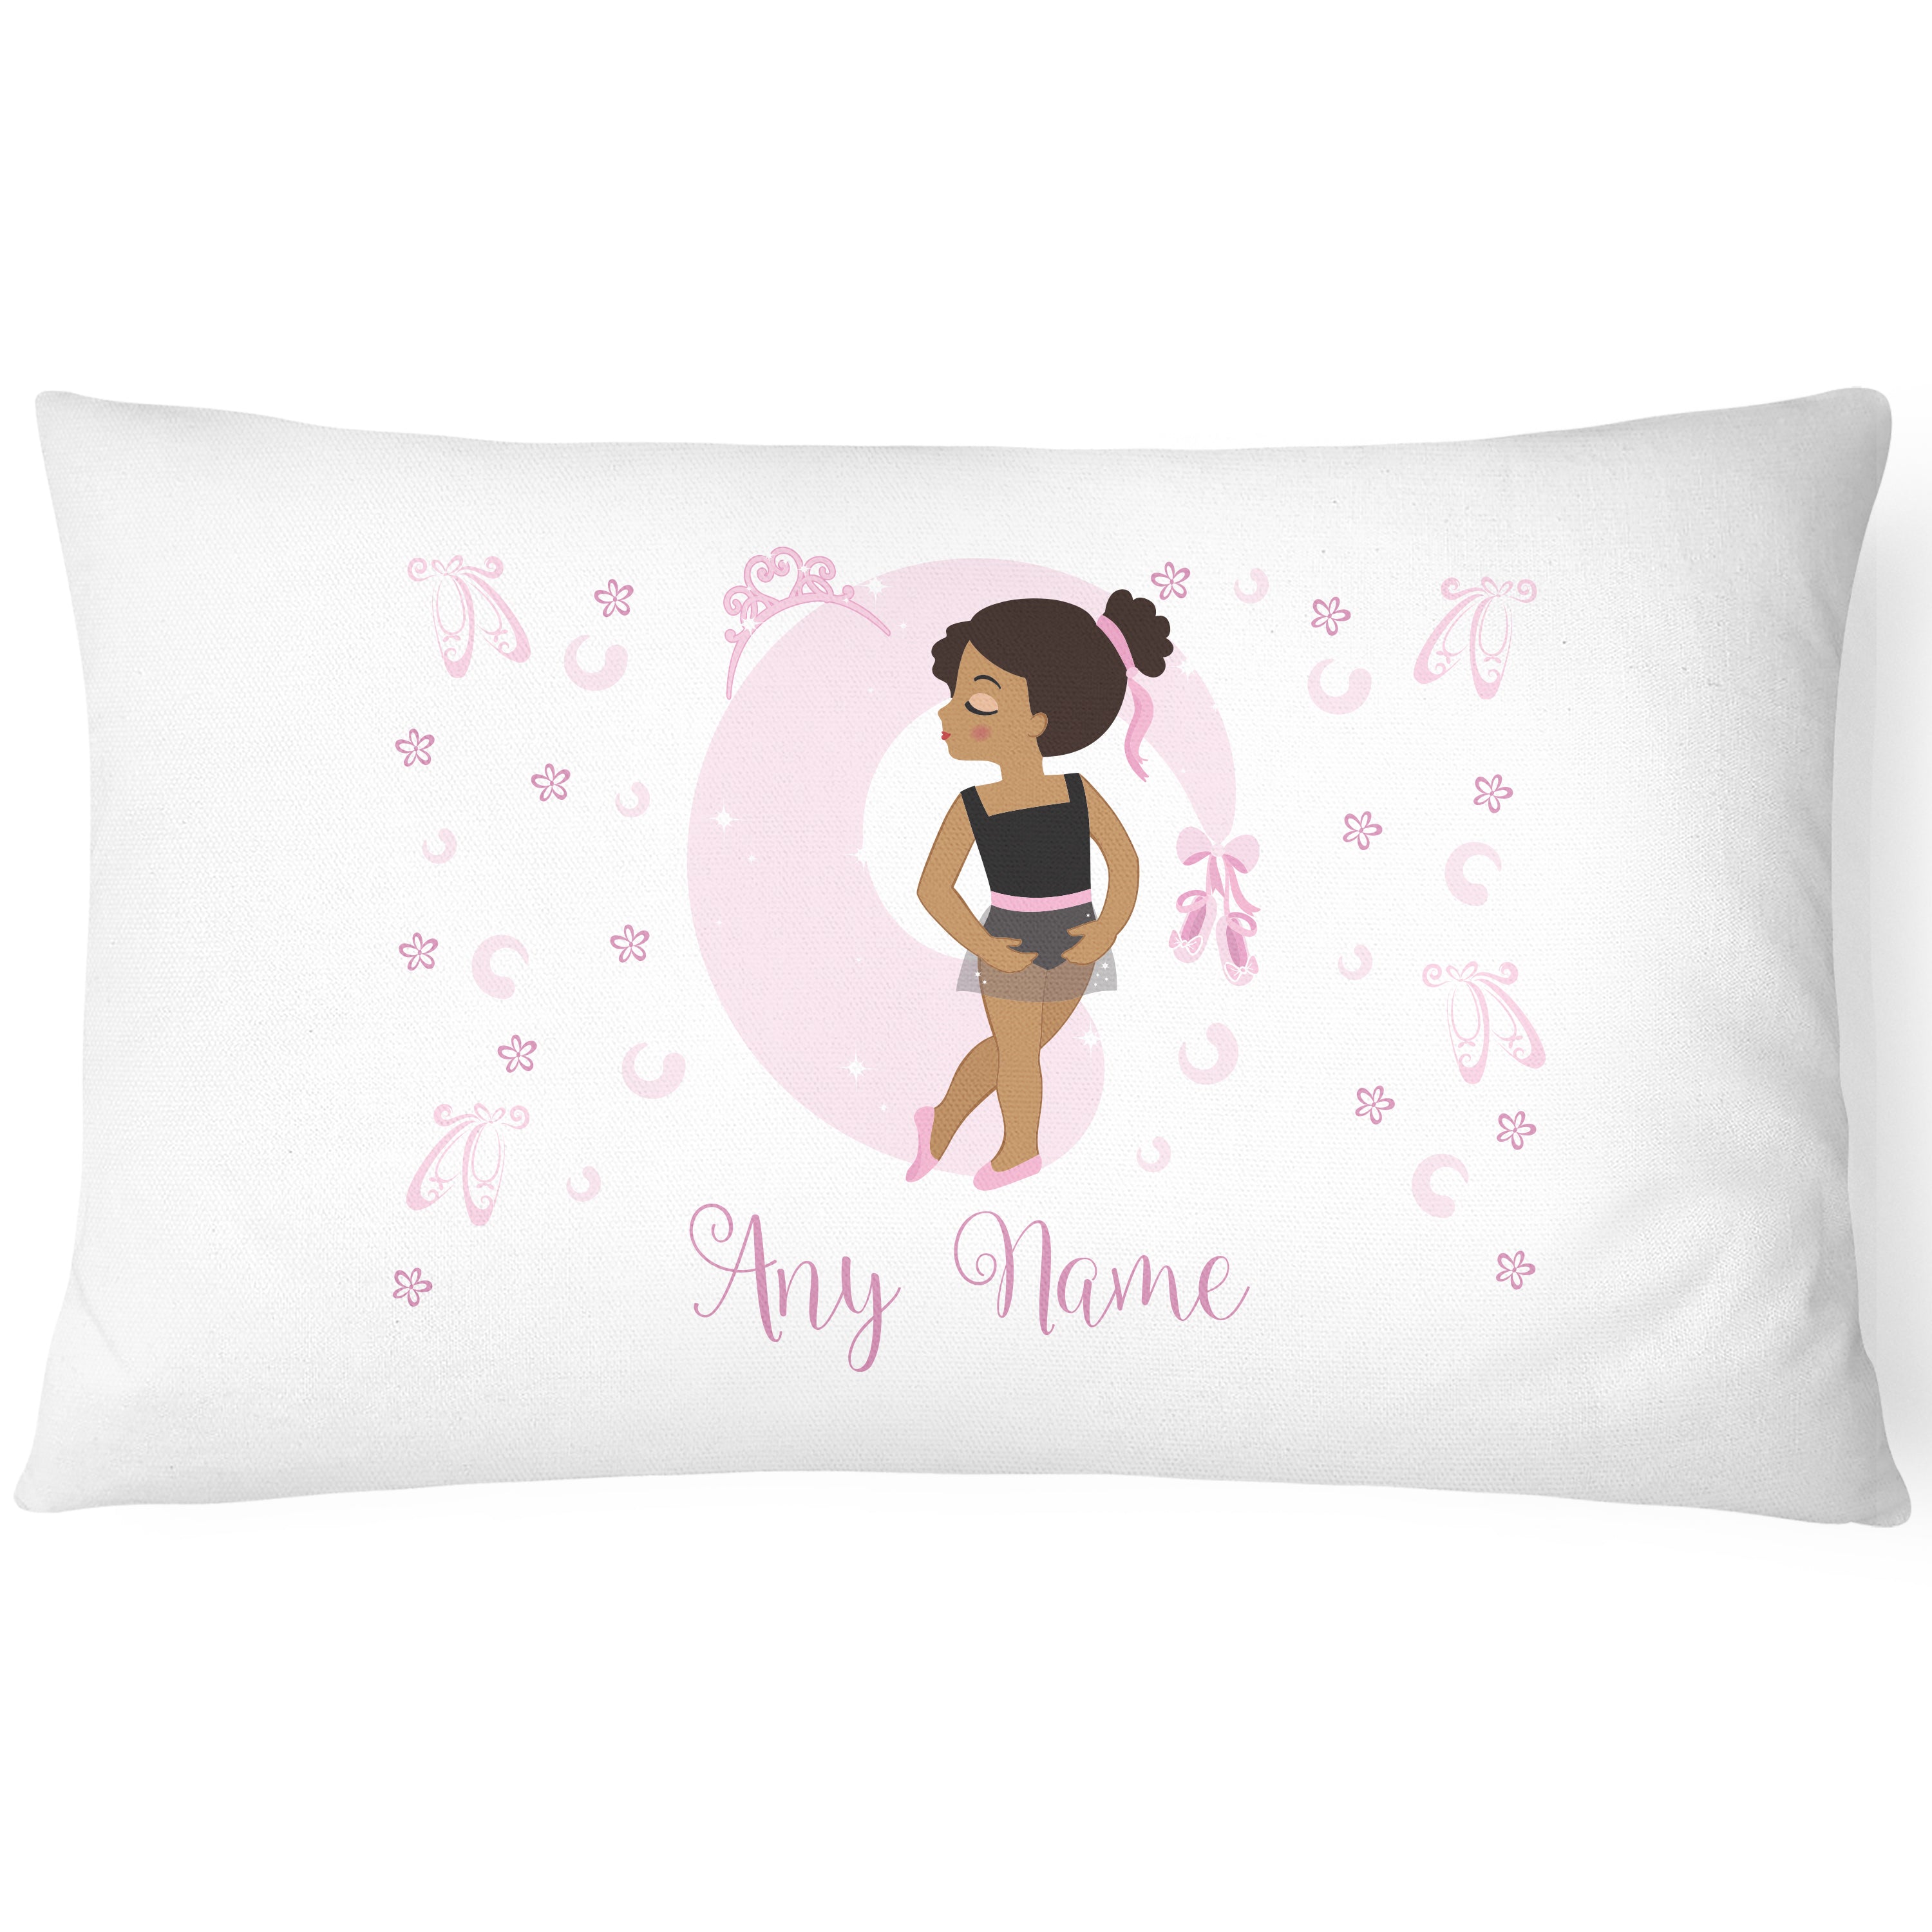 Ballerina Children's Pillowcase - Personalise with Any Name - Adorable